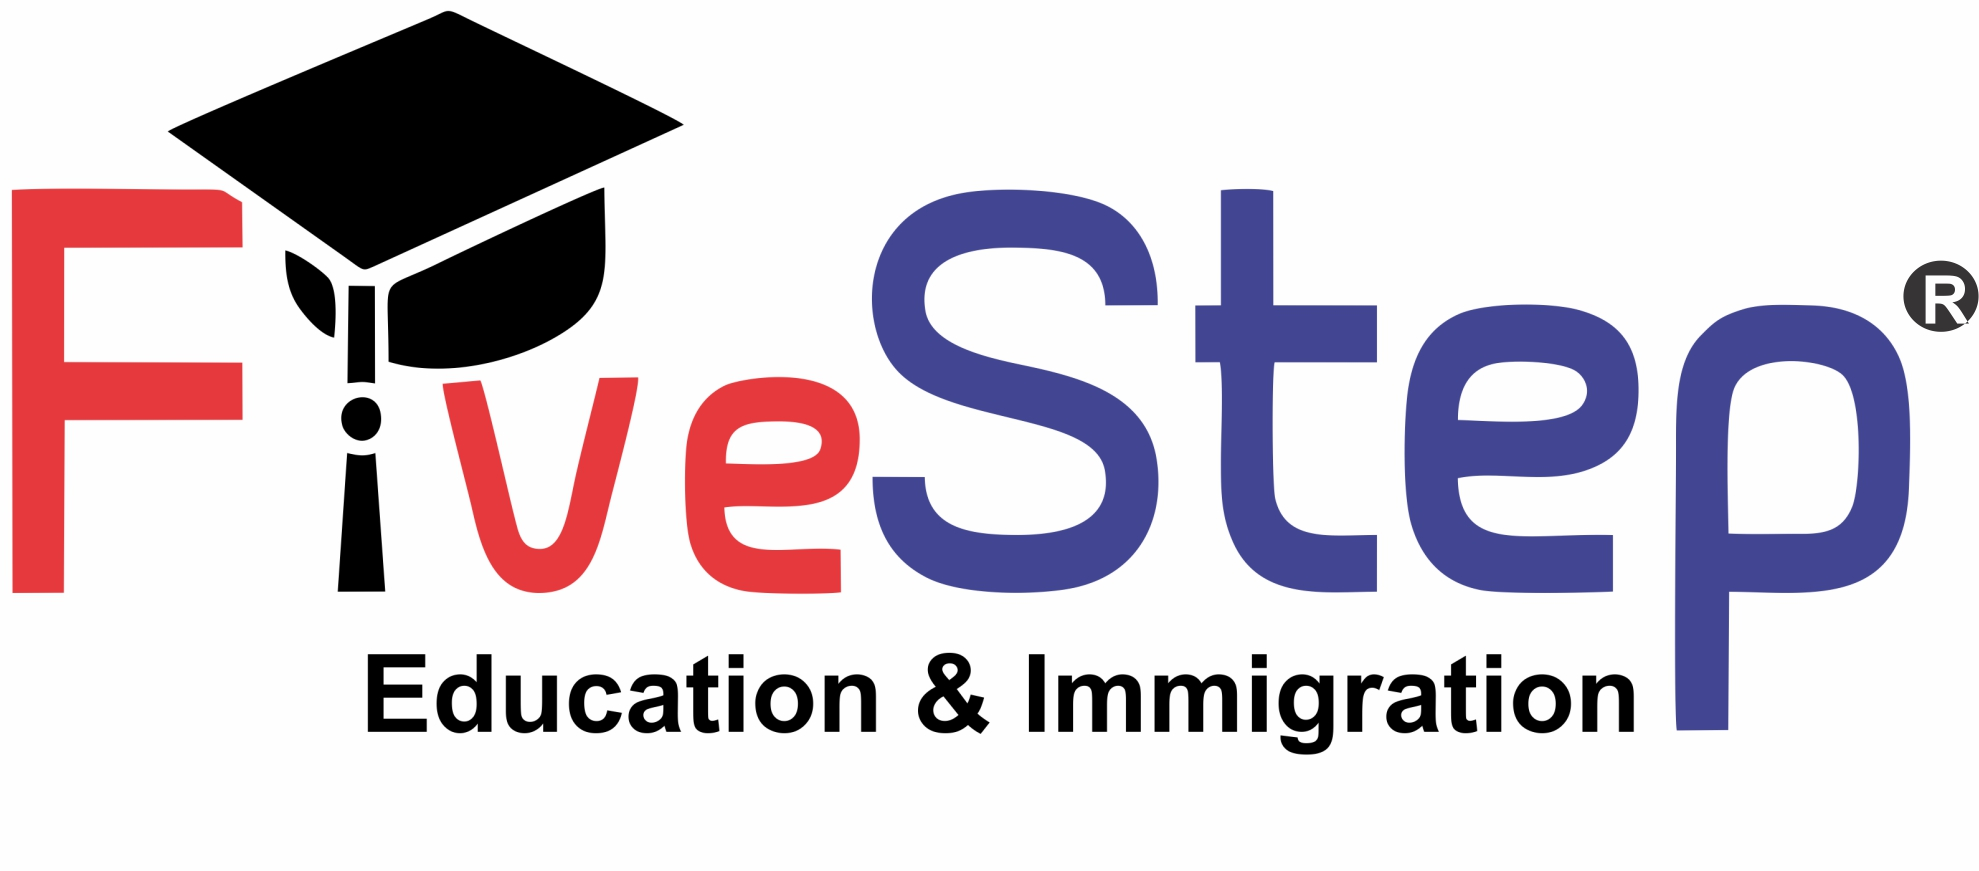 Five Step Education & Immigration